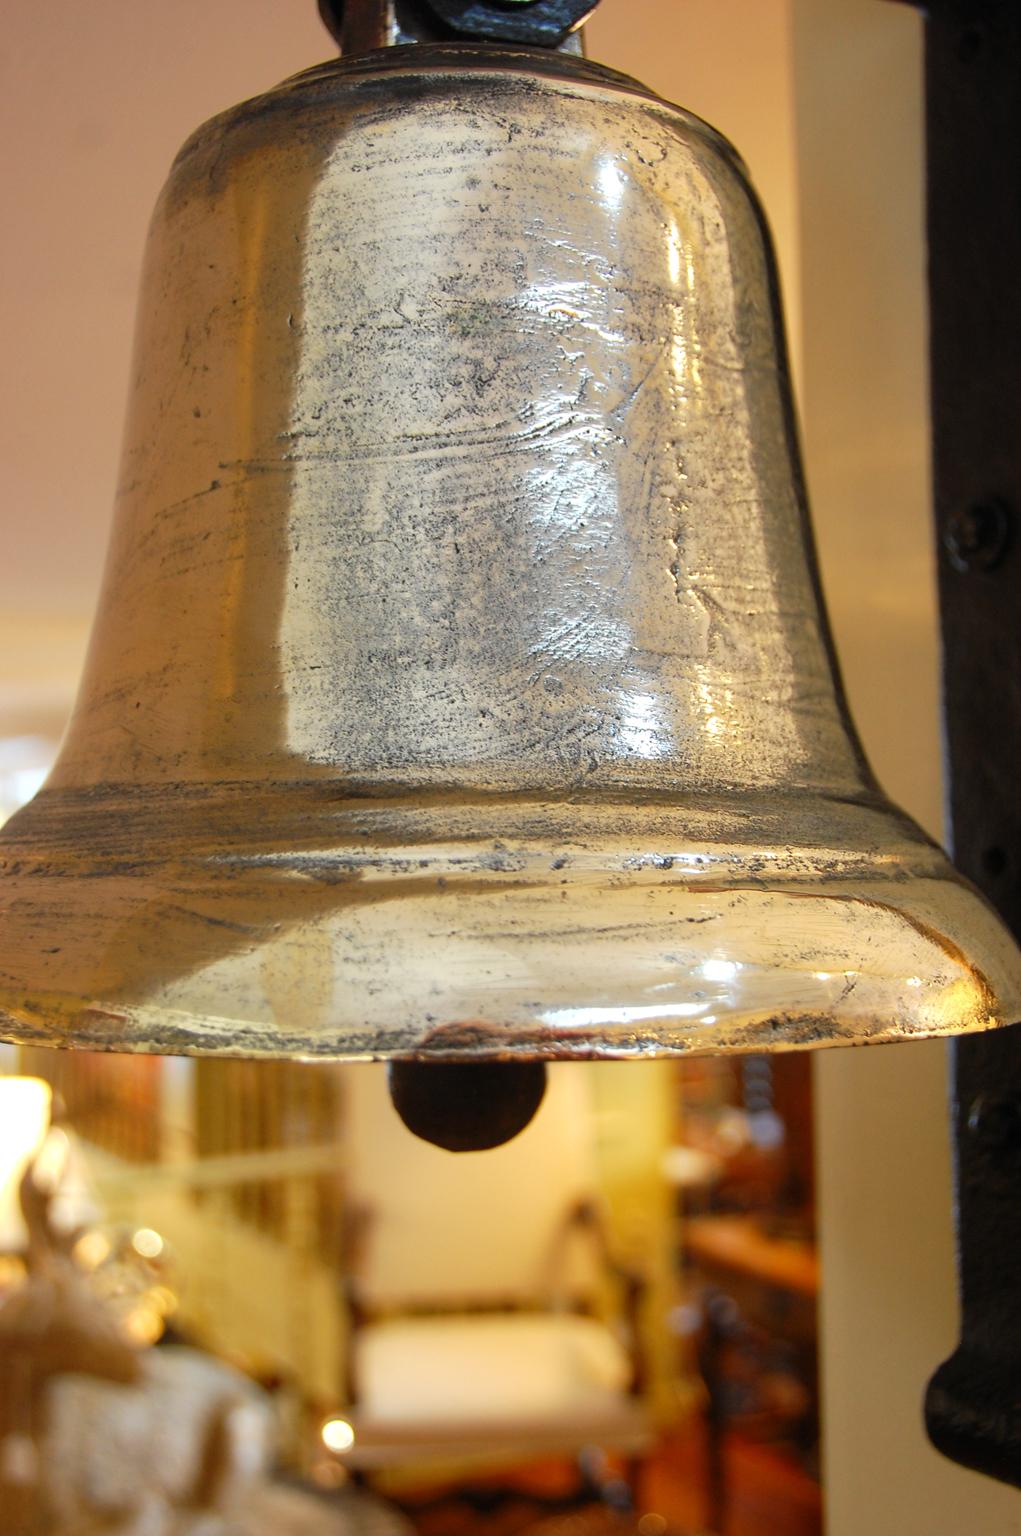 English 19th century military hanging bell in cast bell metal, iron clapper; a clear sound that carries well makes this a joy to hear. The holder for the bell has been made from an 18th century American barn door hinge of unusually thick iron, so